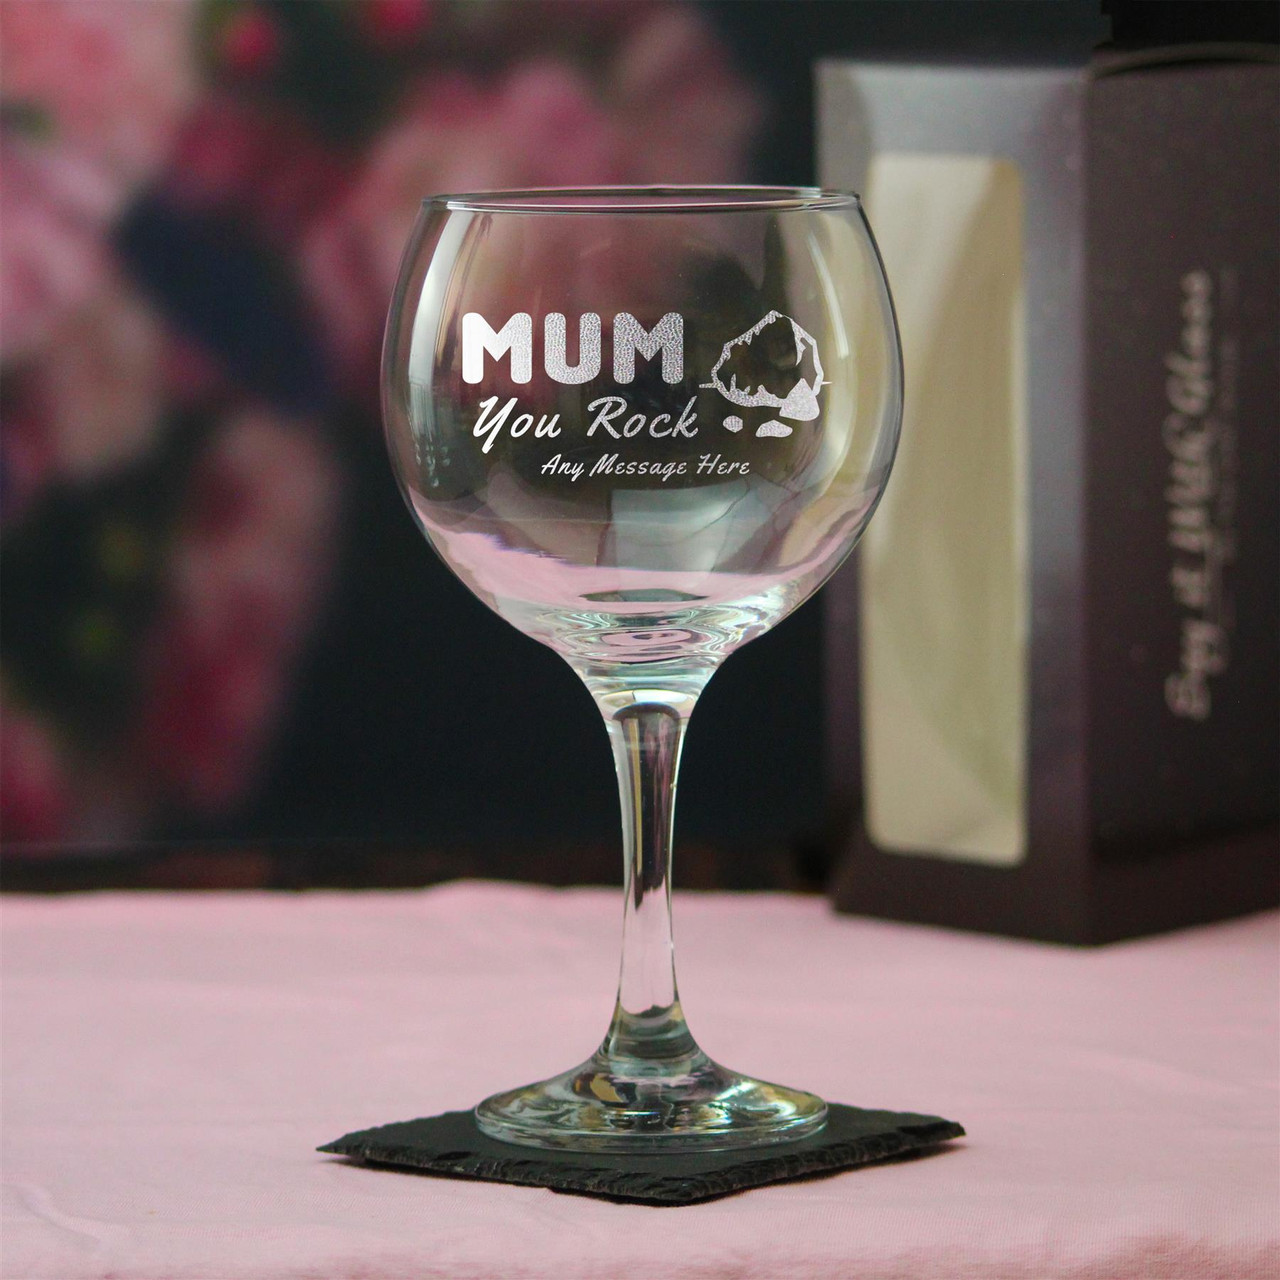 Engraved Any Message Here Wine Glass